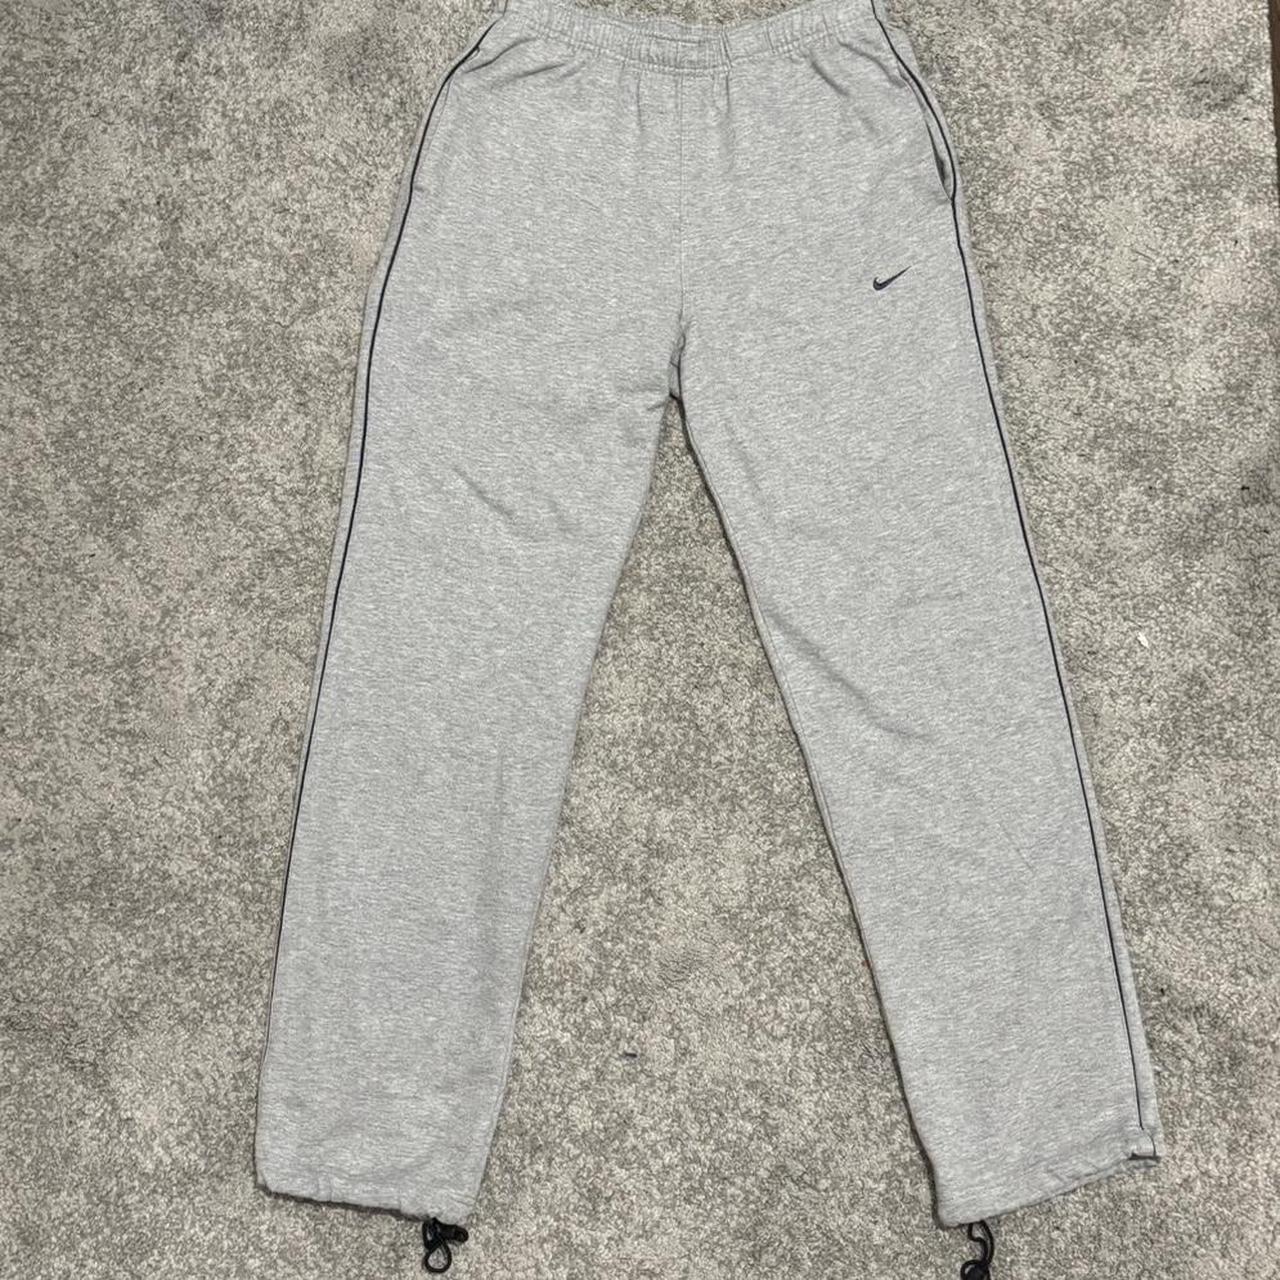 Super clean nike track pants. Cuff at the bottom - Depop